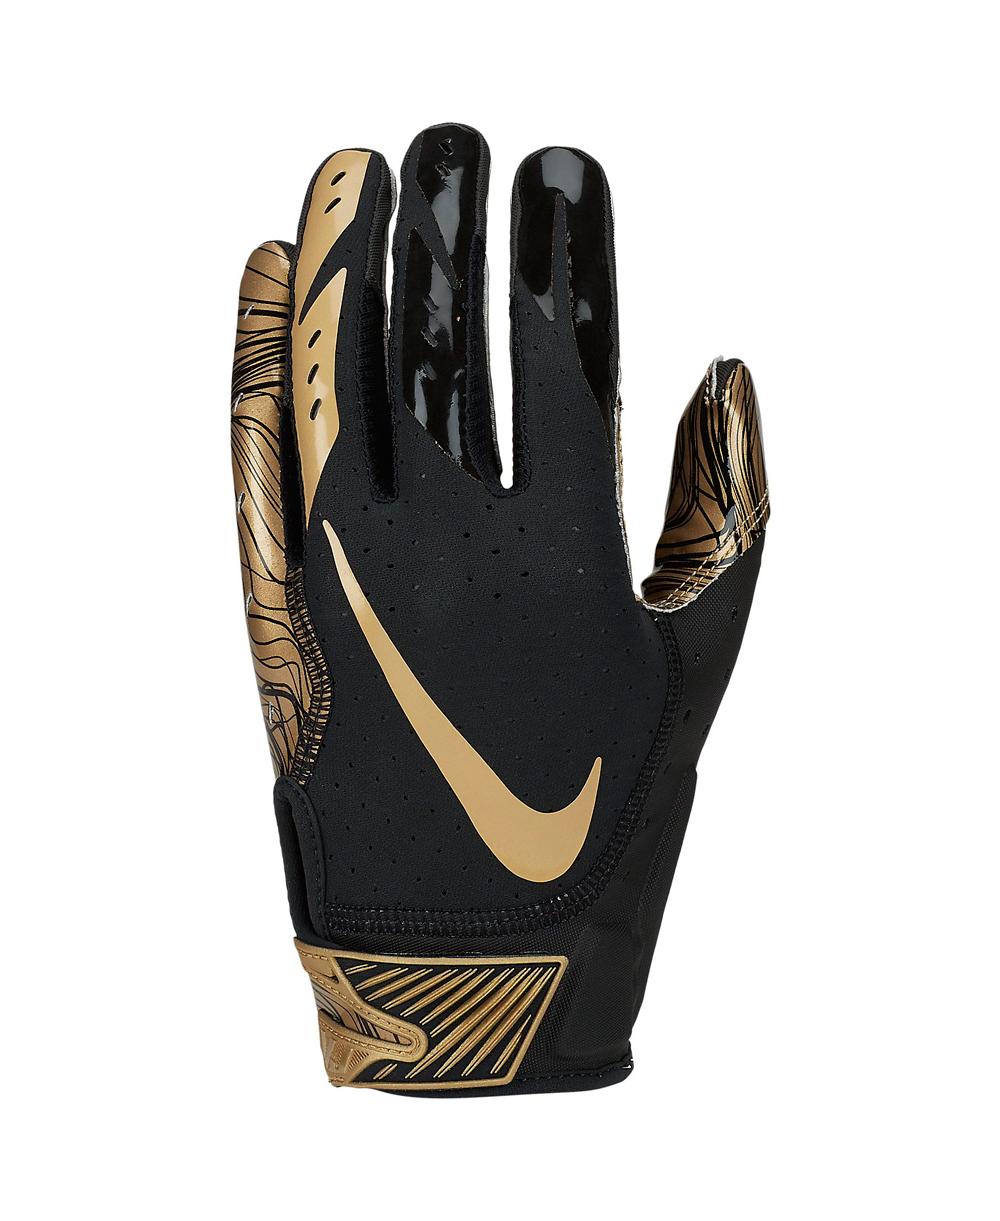 leather football gloves